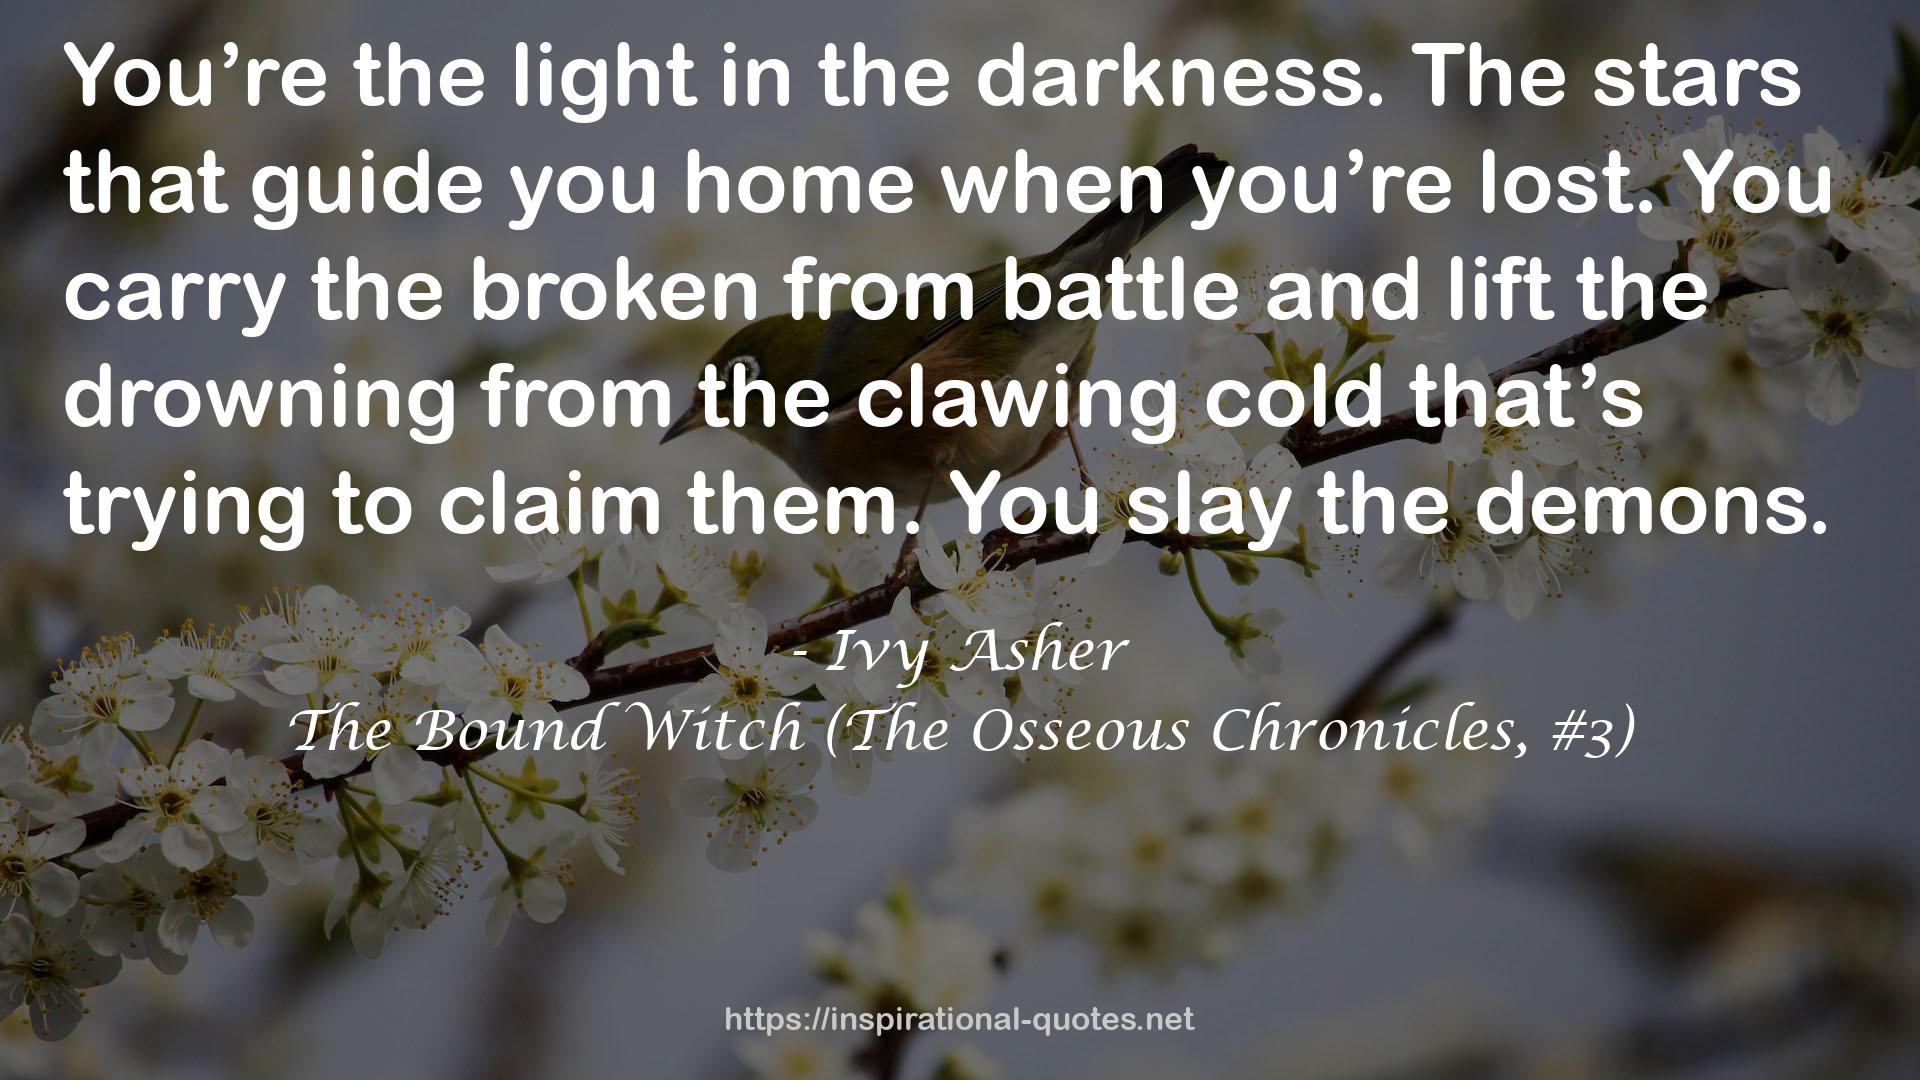 The Bound Witch (The Osseous Chronicles, #3) QUOTES